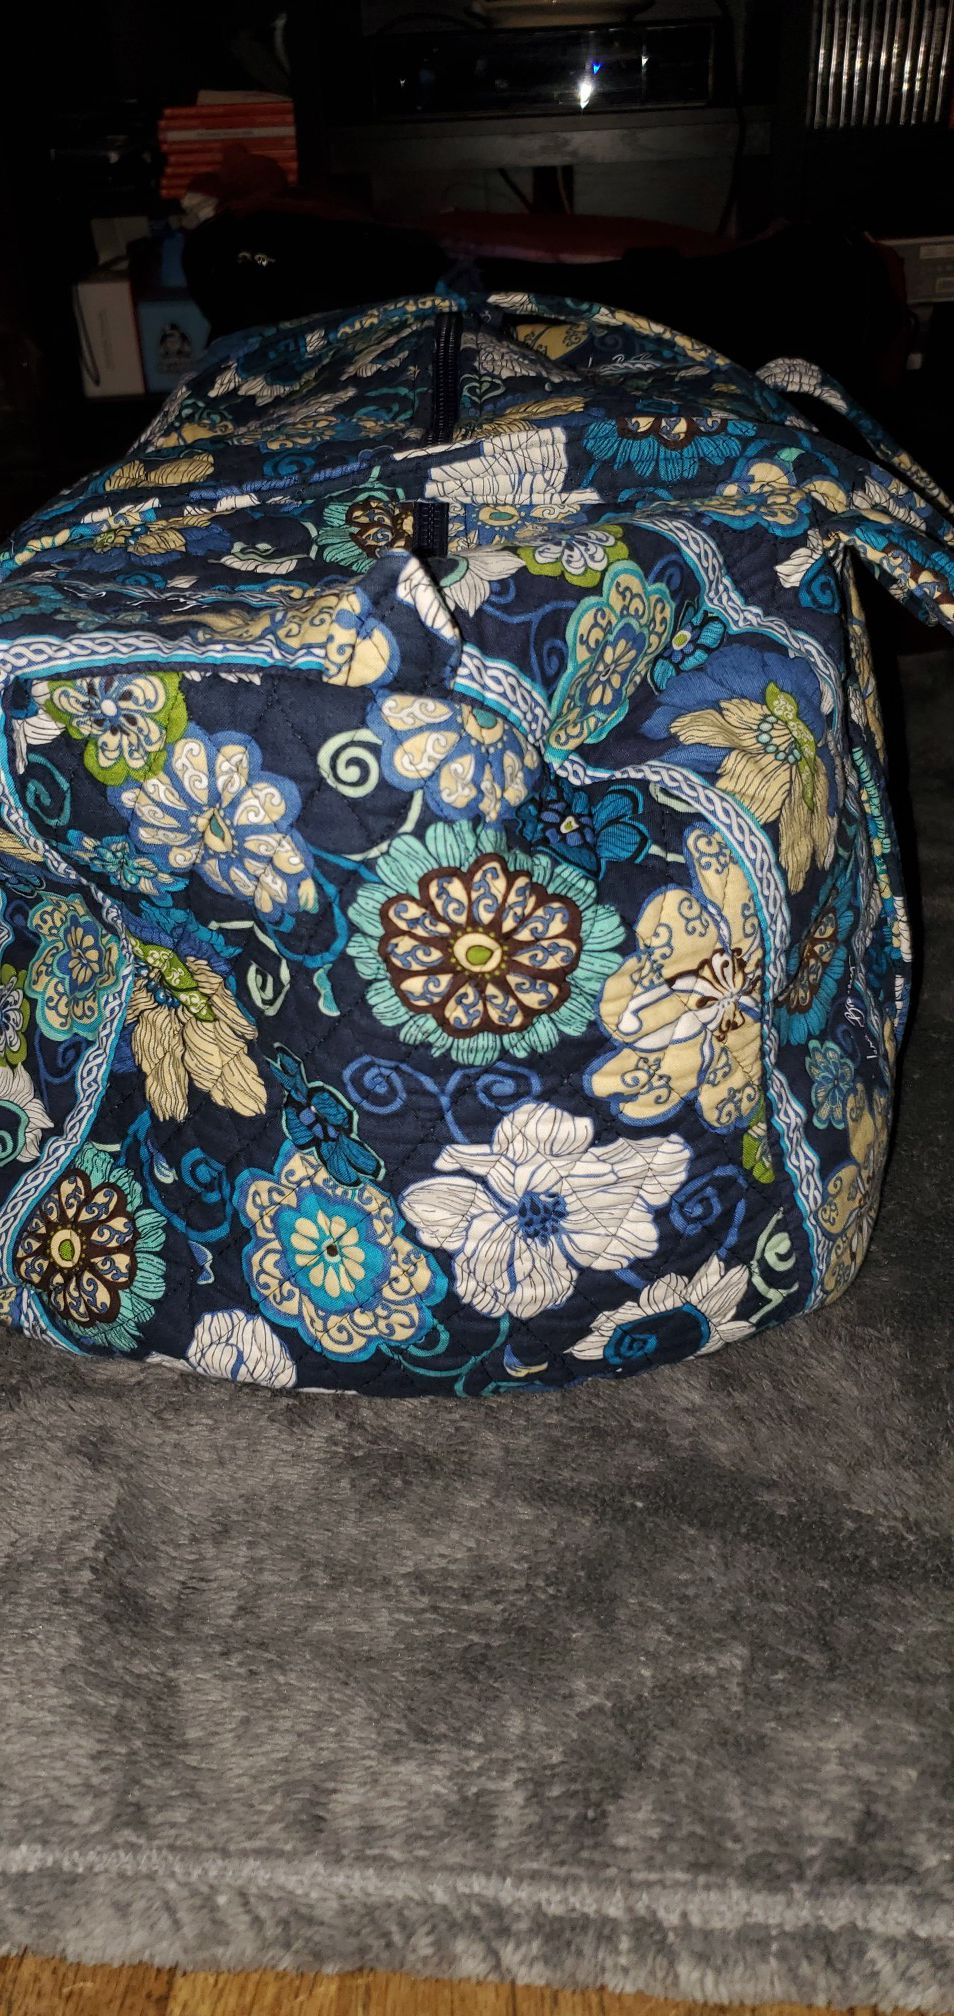 VERA BRADLEY LARGE TRAVEL DUFFLE BAG / TOTE BAG 21" X 11" INCHES PRE-OWNED IN GOOD CONDITION